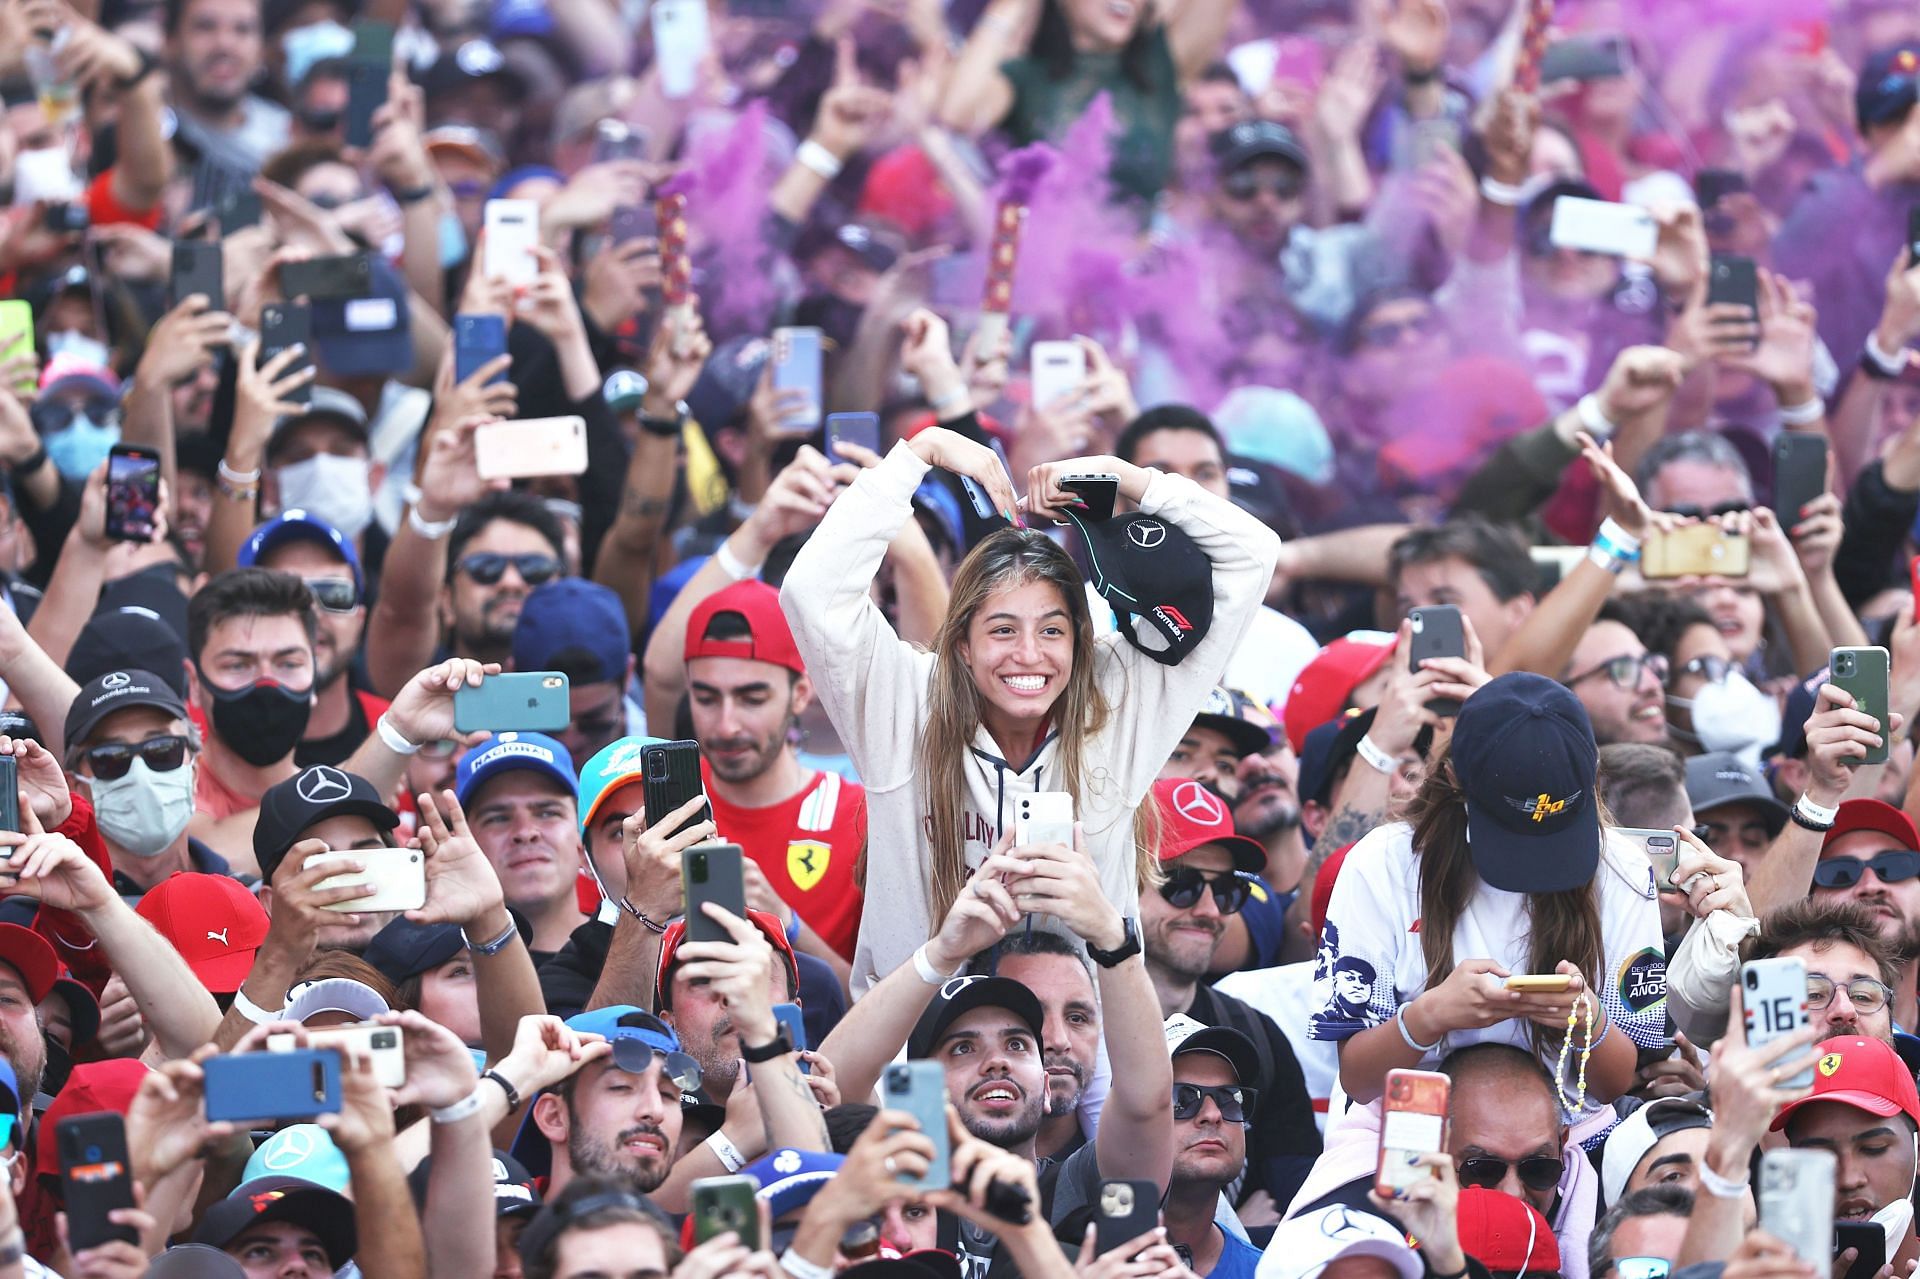 Fans enjoy the podium celebrations during the 2021 Grand Prix in Brazil (Photo by Lars Baron/Getty Images)